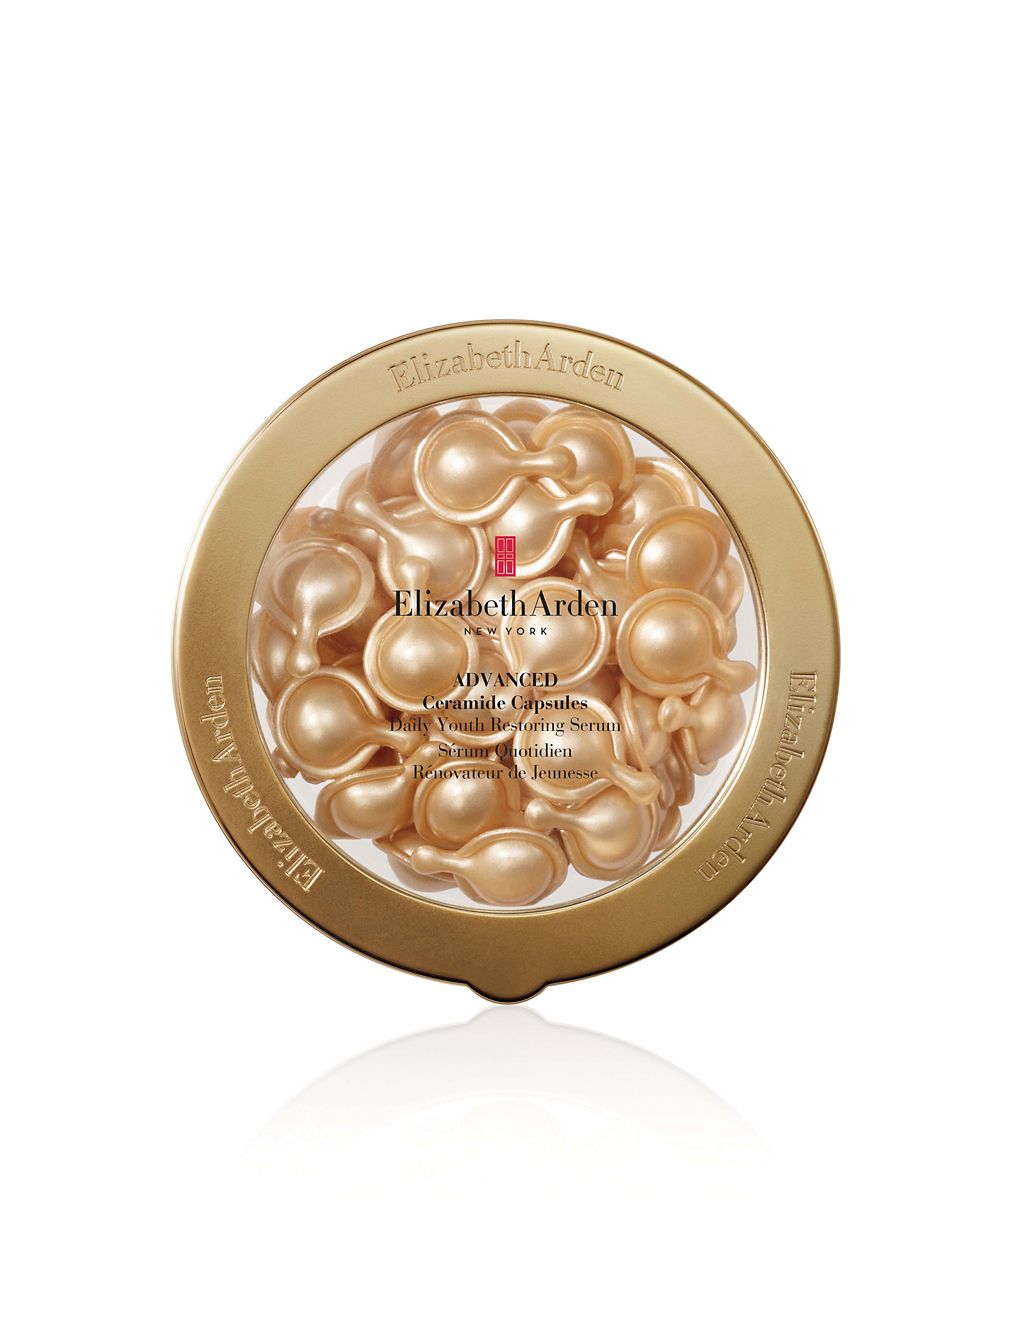 Advanced Ceramide Capsules Daily Youth Restoring Serum 60 Piece 3 of 8